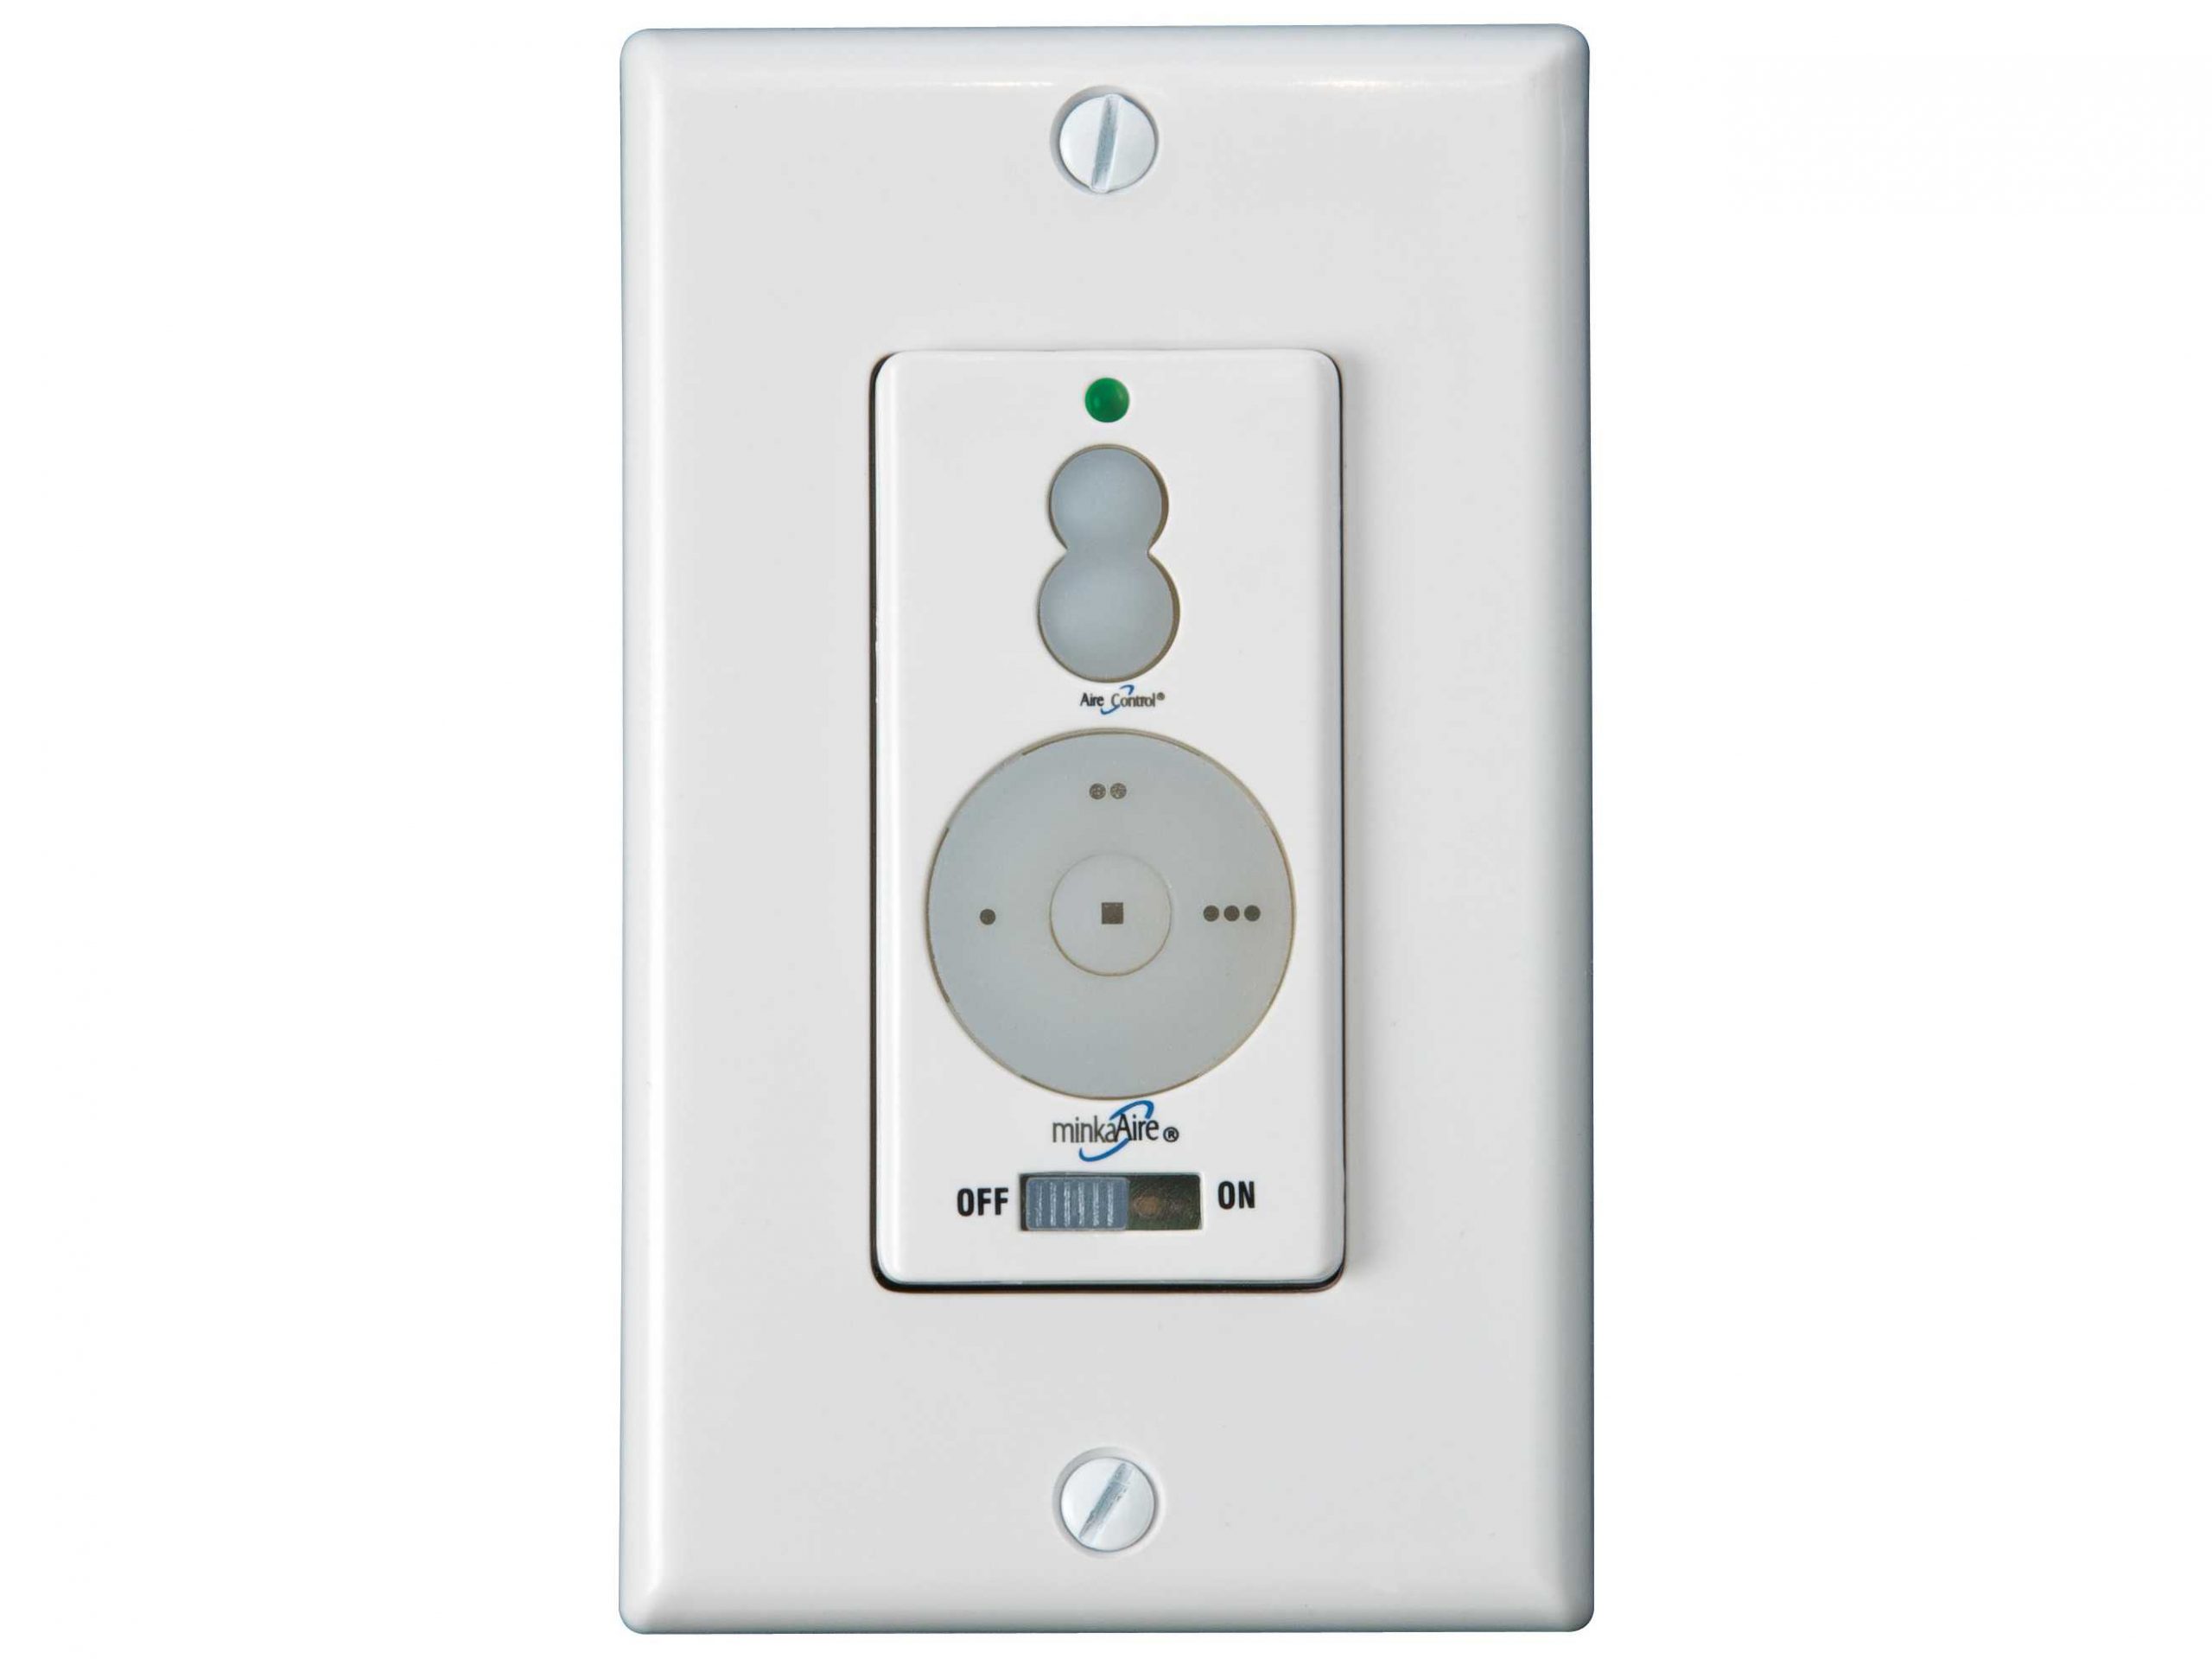 Minka Aire Wcs213 Full Function Wall Control With Manual Reverse 256 Bit throughout dimensions 2628 X 1971